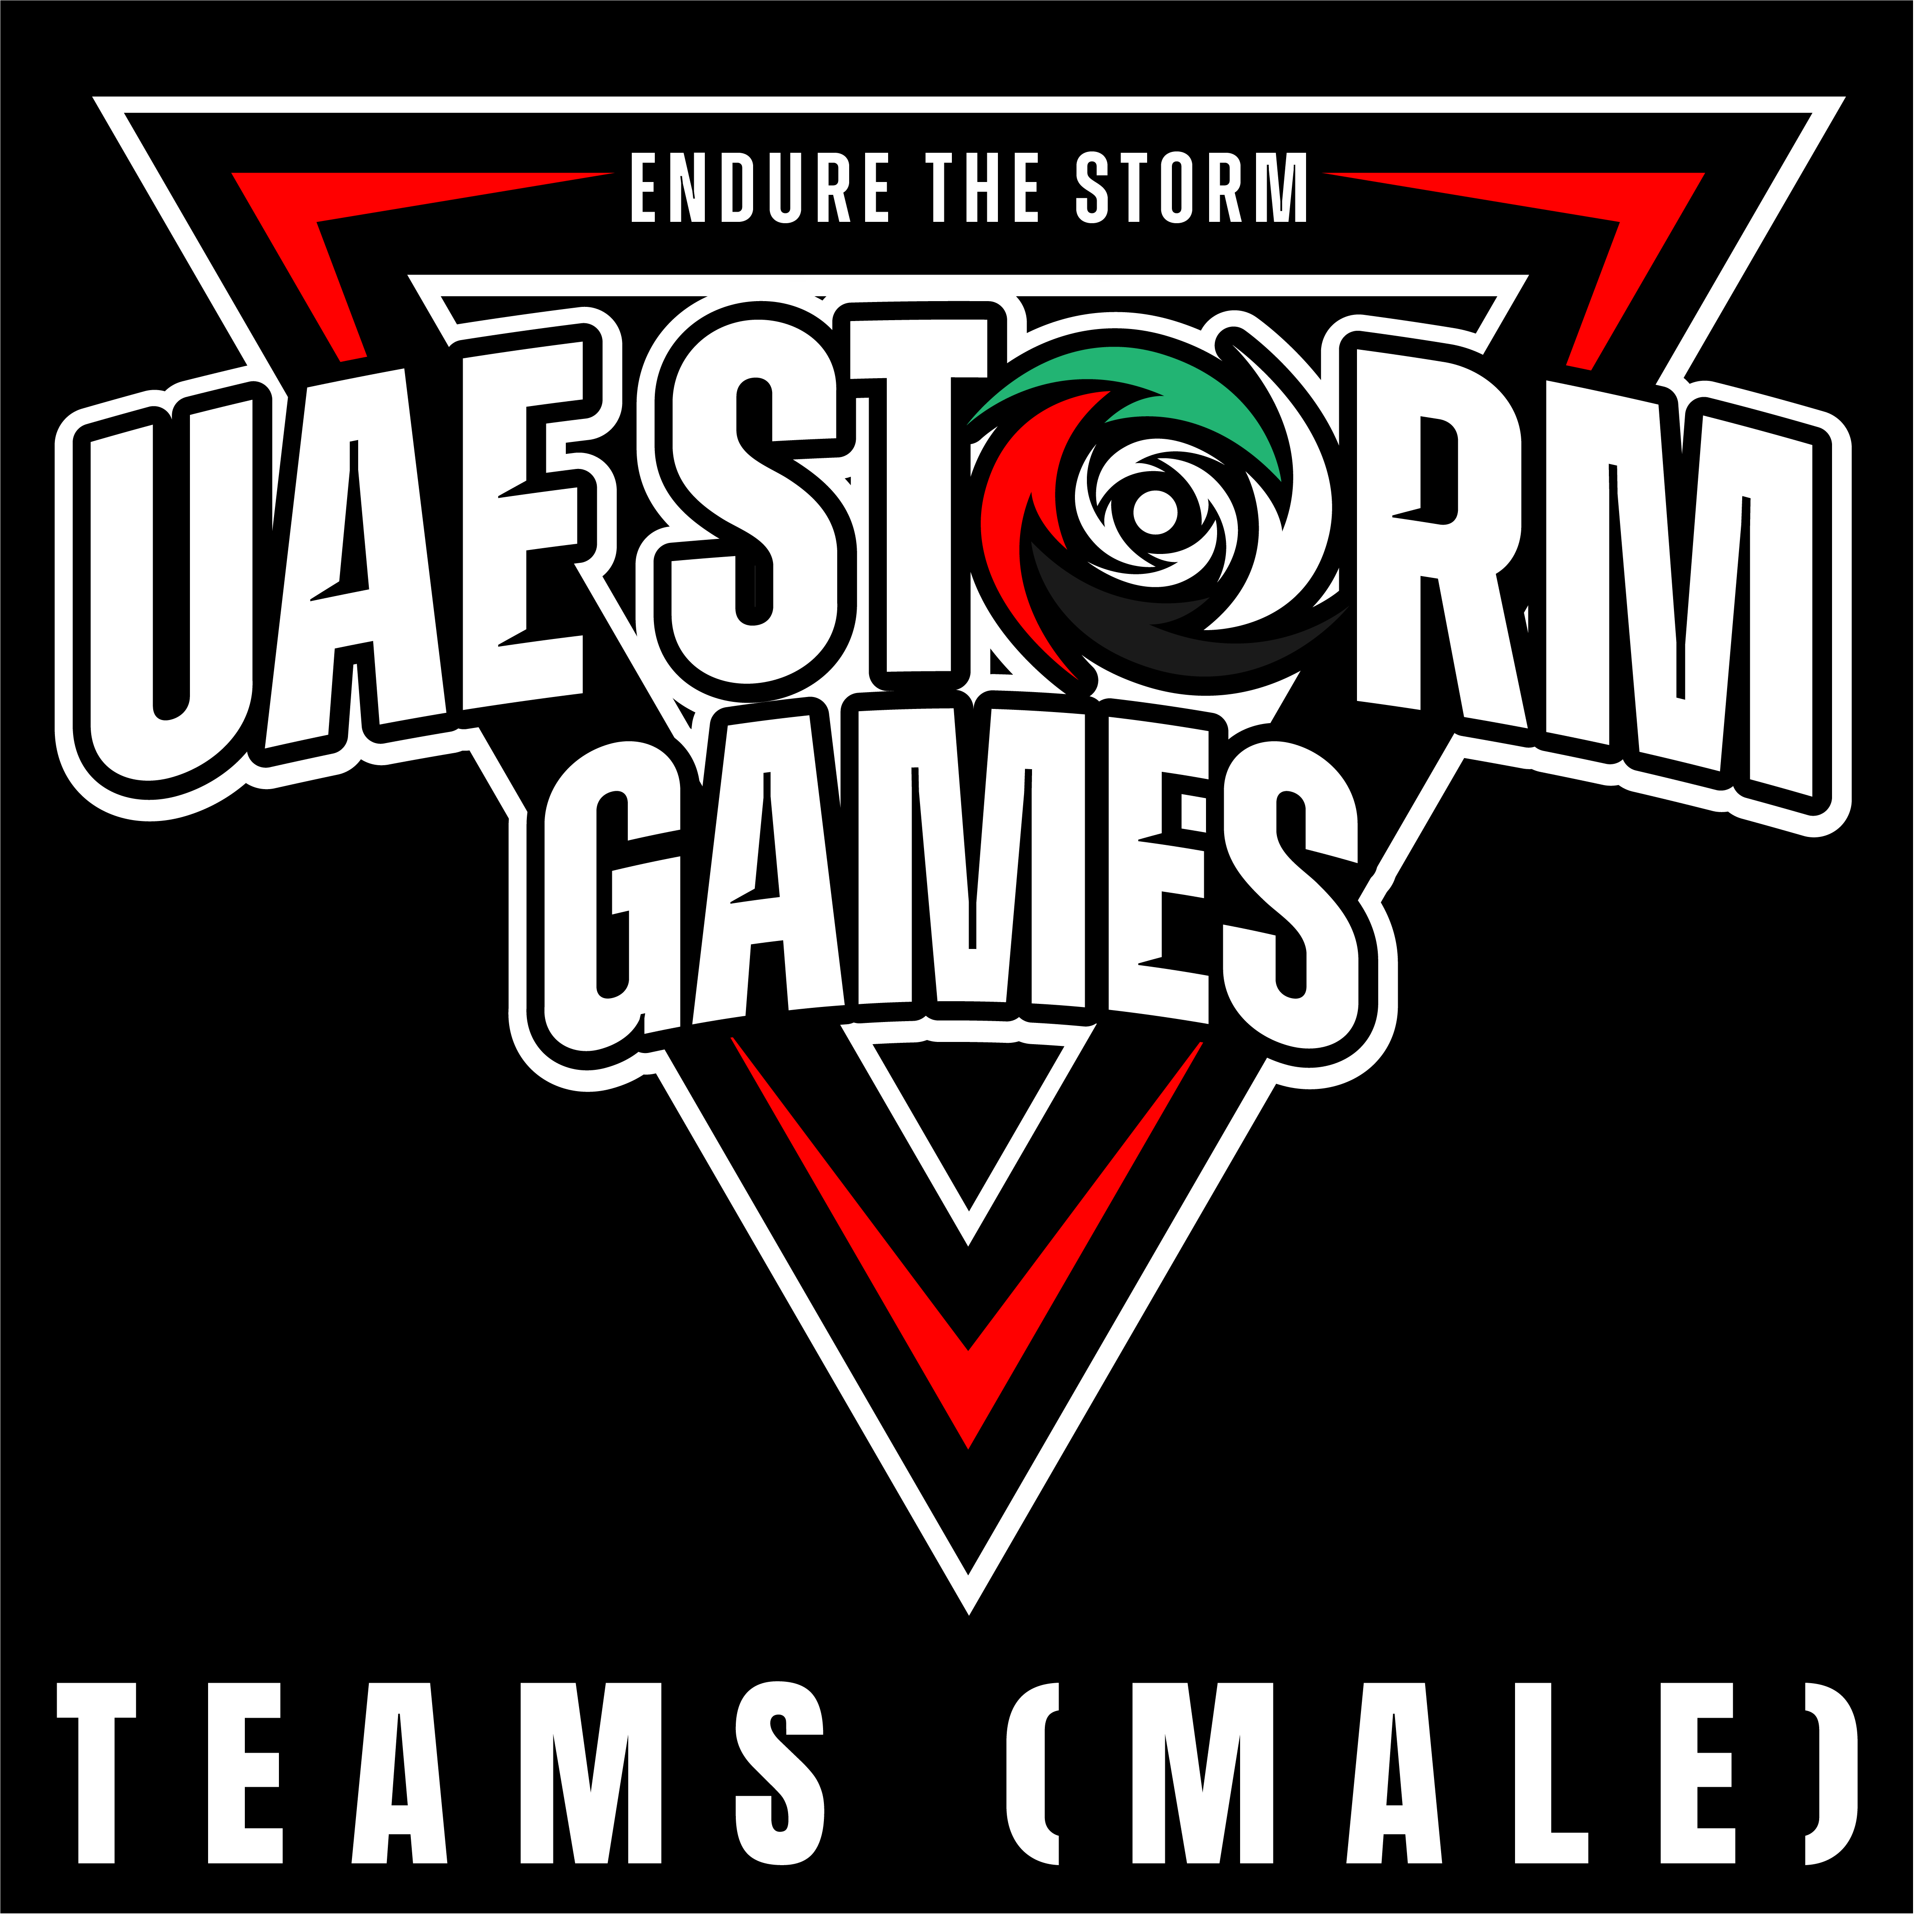 Teams Category (3 Males) from UAE Storm Games'24 for Genejack WOD